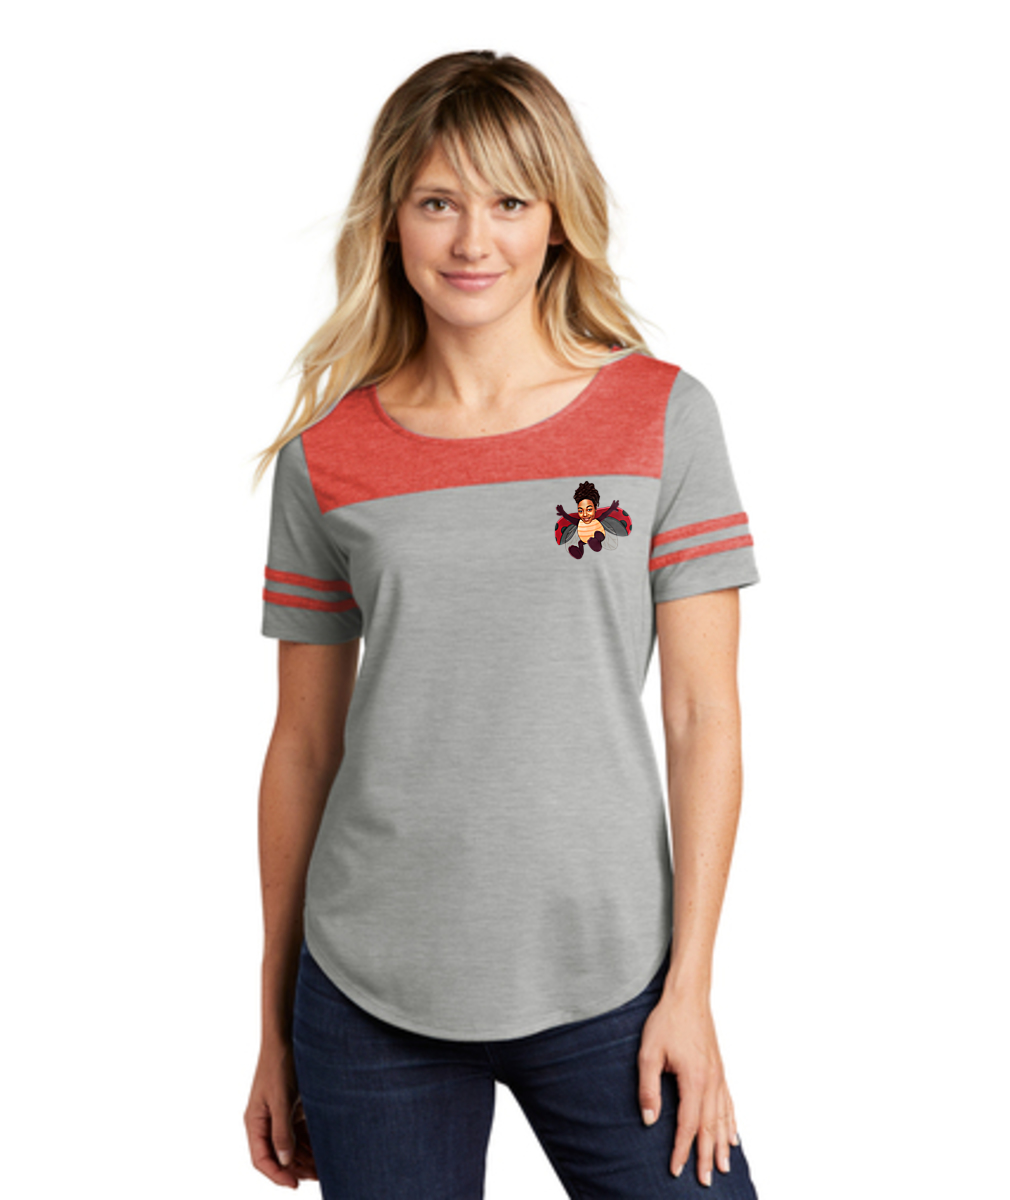 Gifted by Brit Embroidered Women's Tri-Blend Fan T-Shirt or Similar